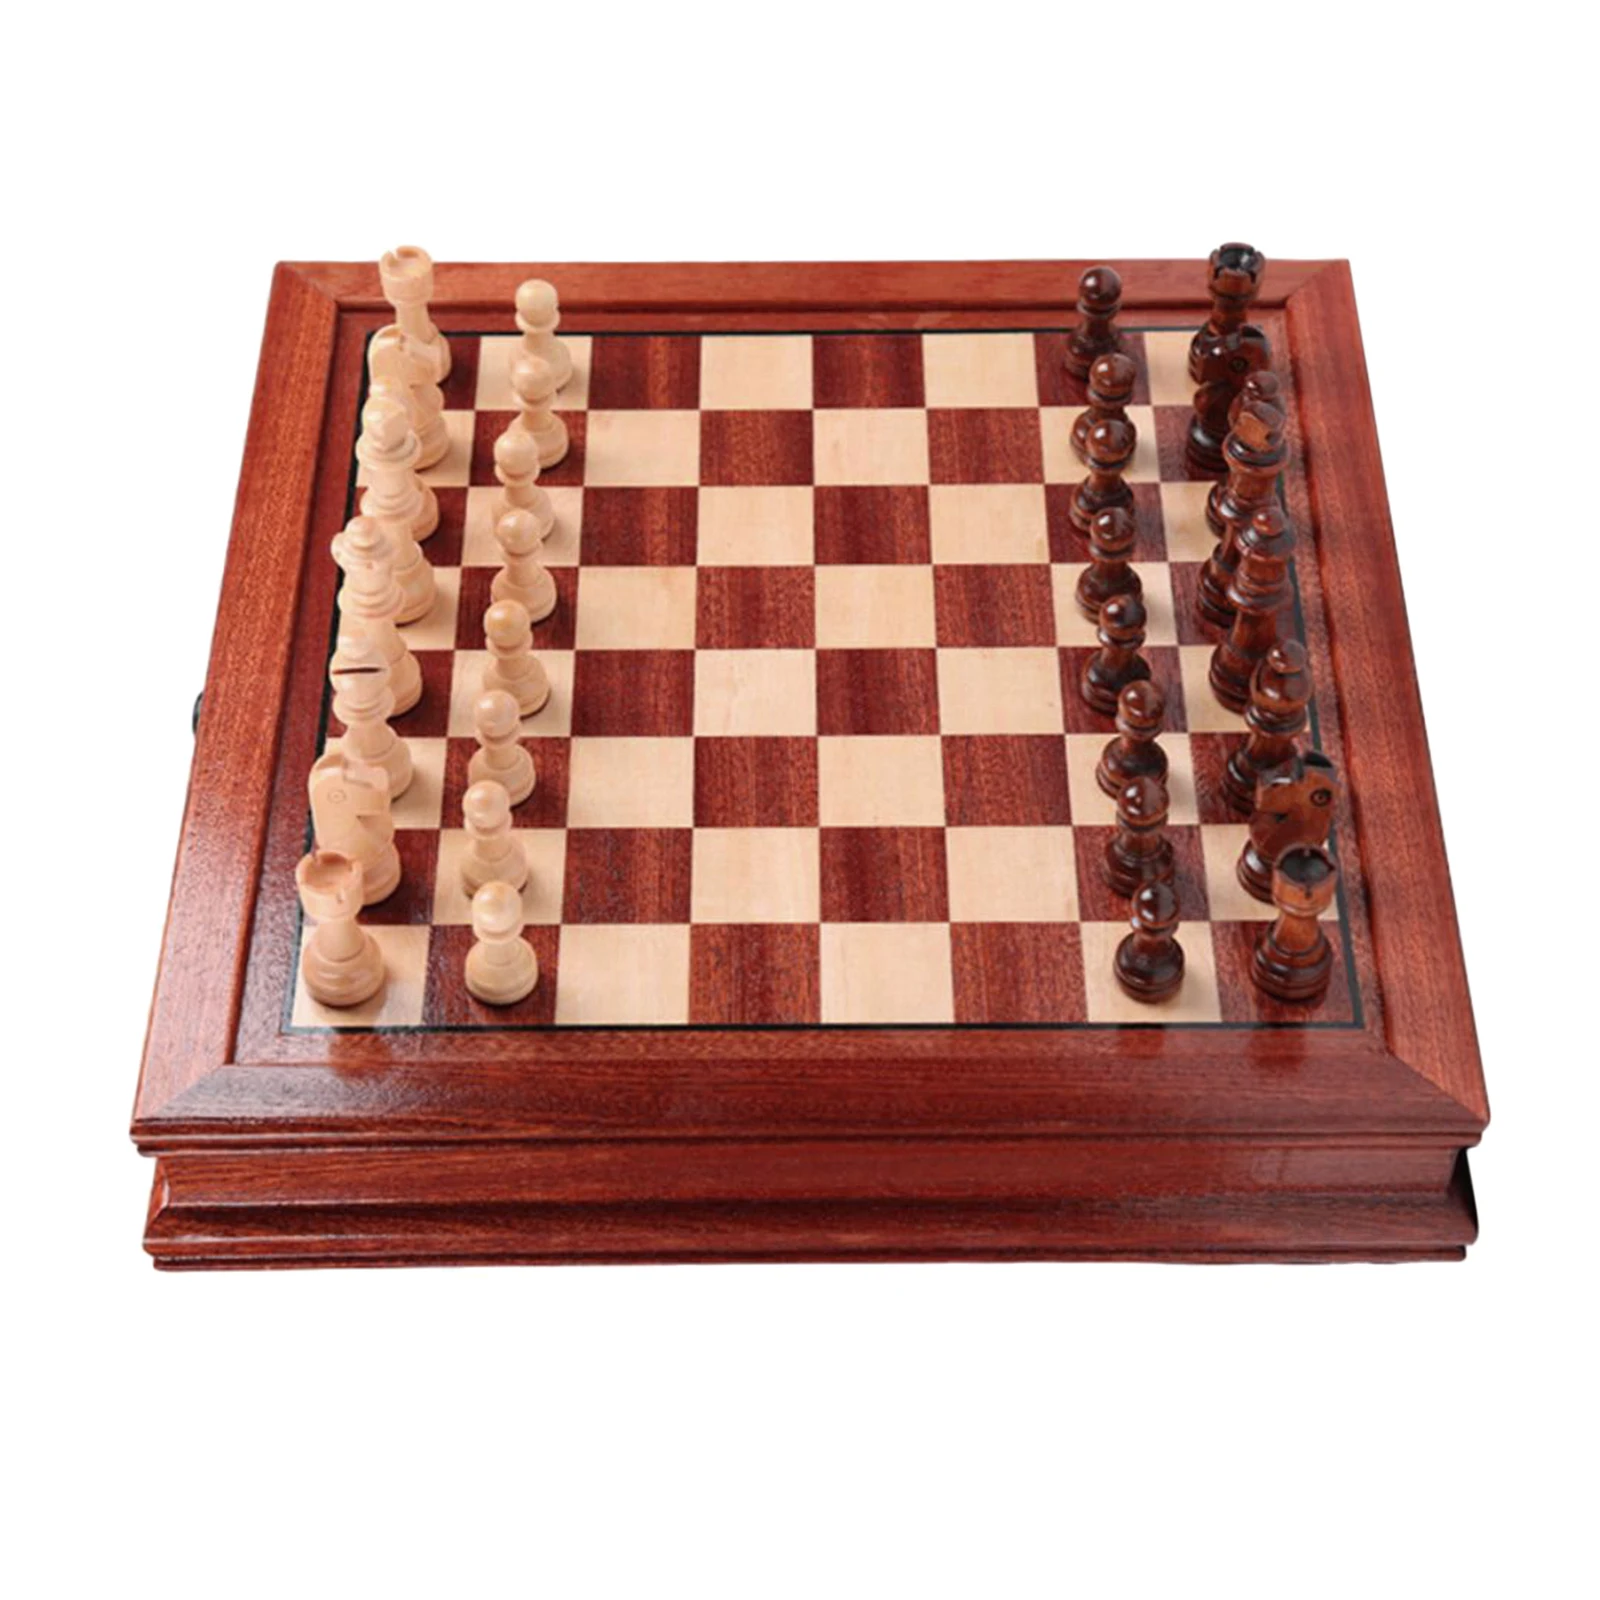 32x32cm Wooden International Chess Set with Storage Drawer Board Game Funny Game Chessmen Collection Board Game